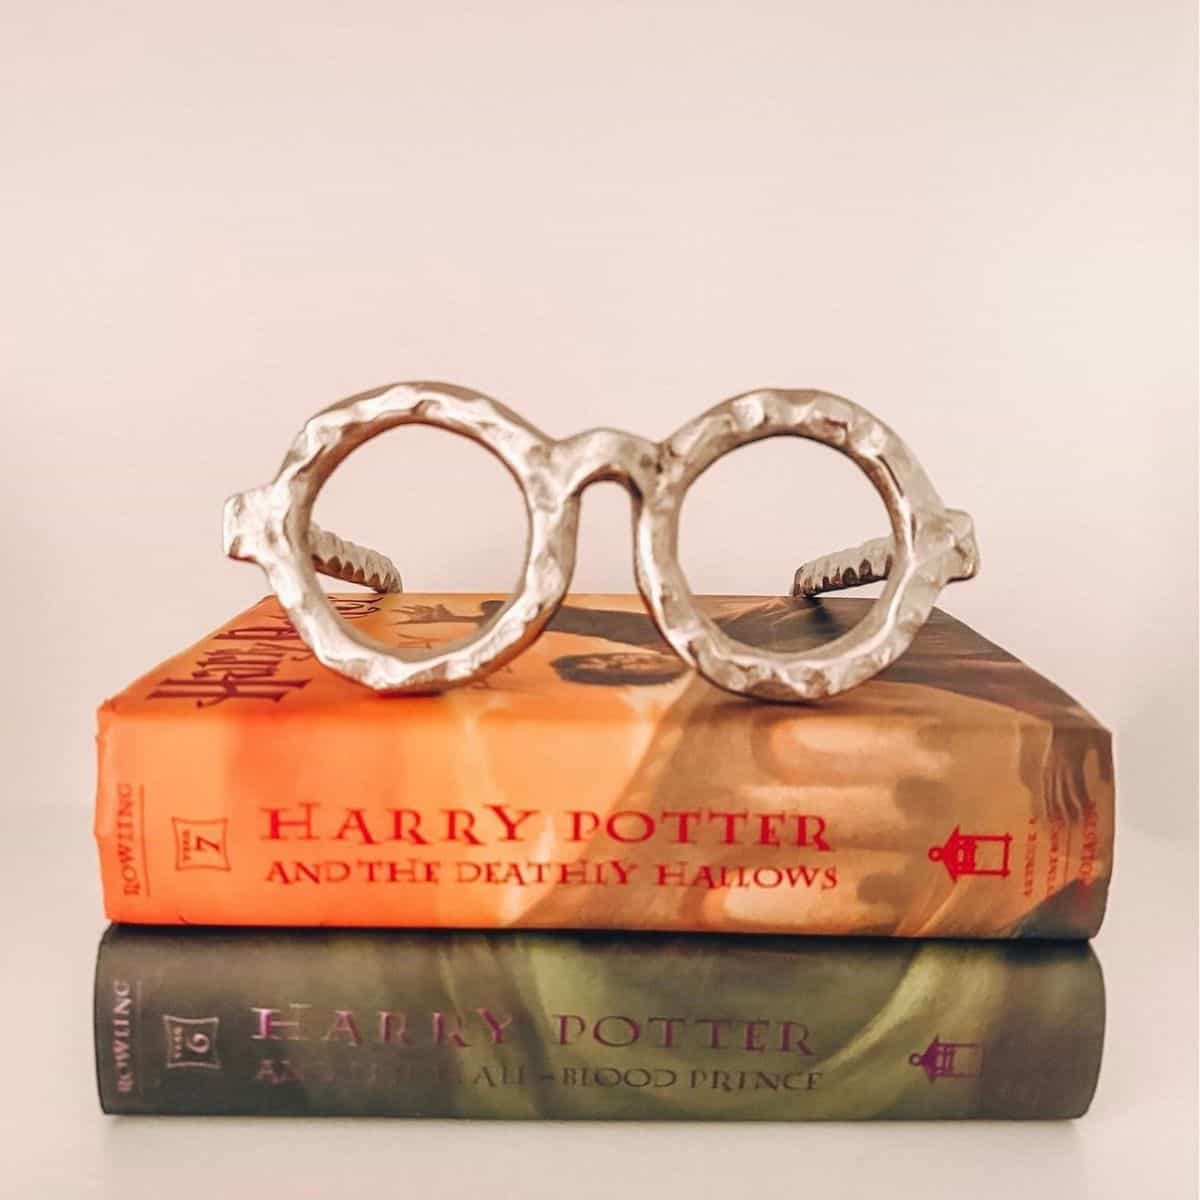 harry potter books with glasses on top of them.